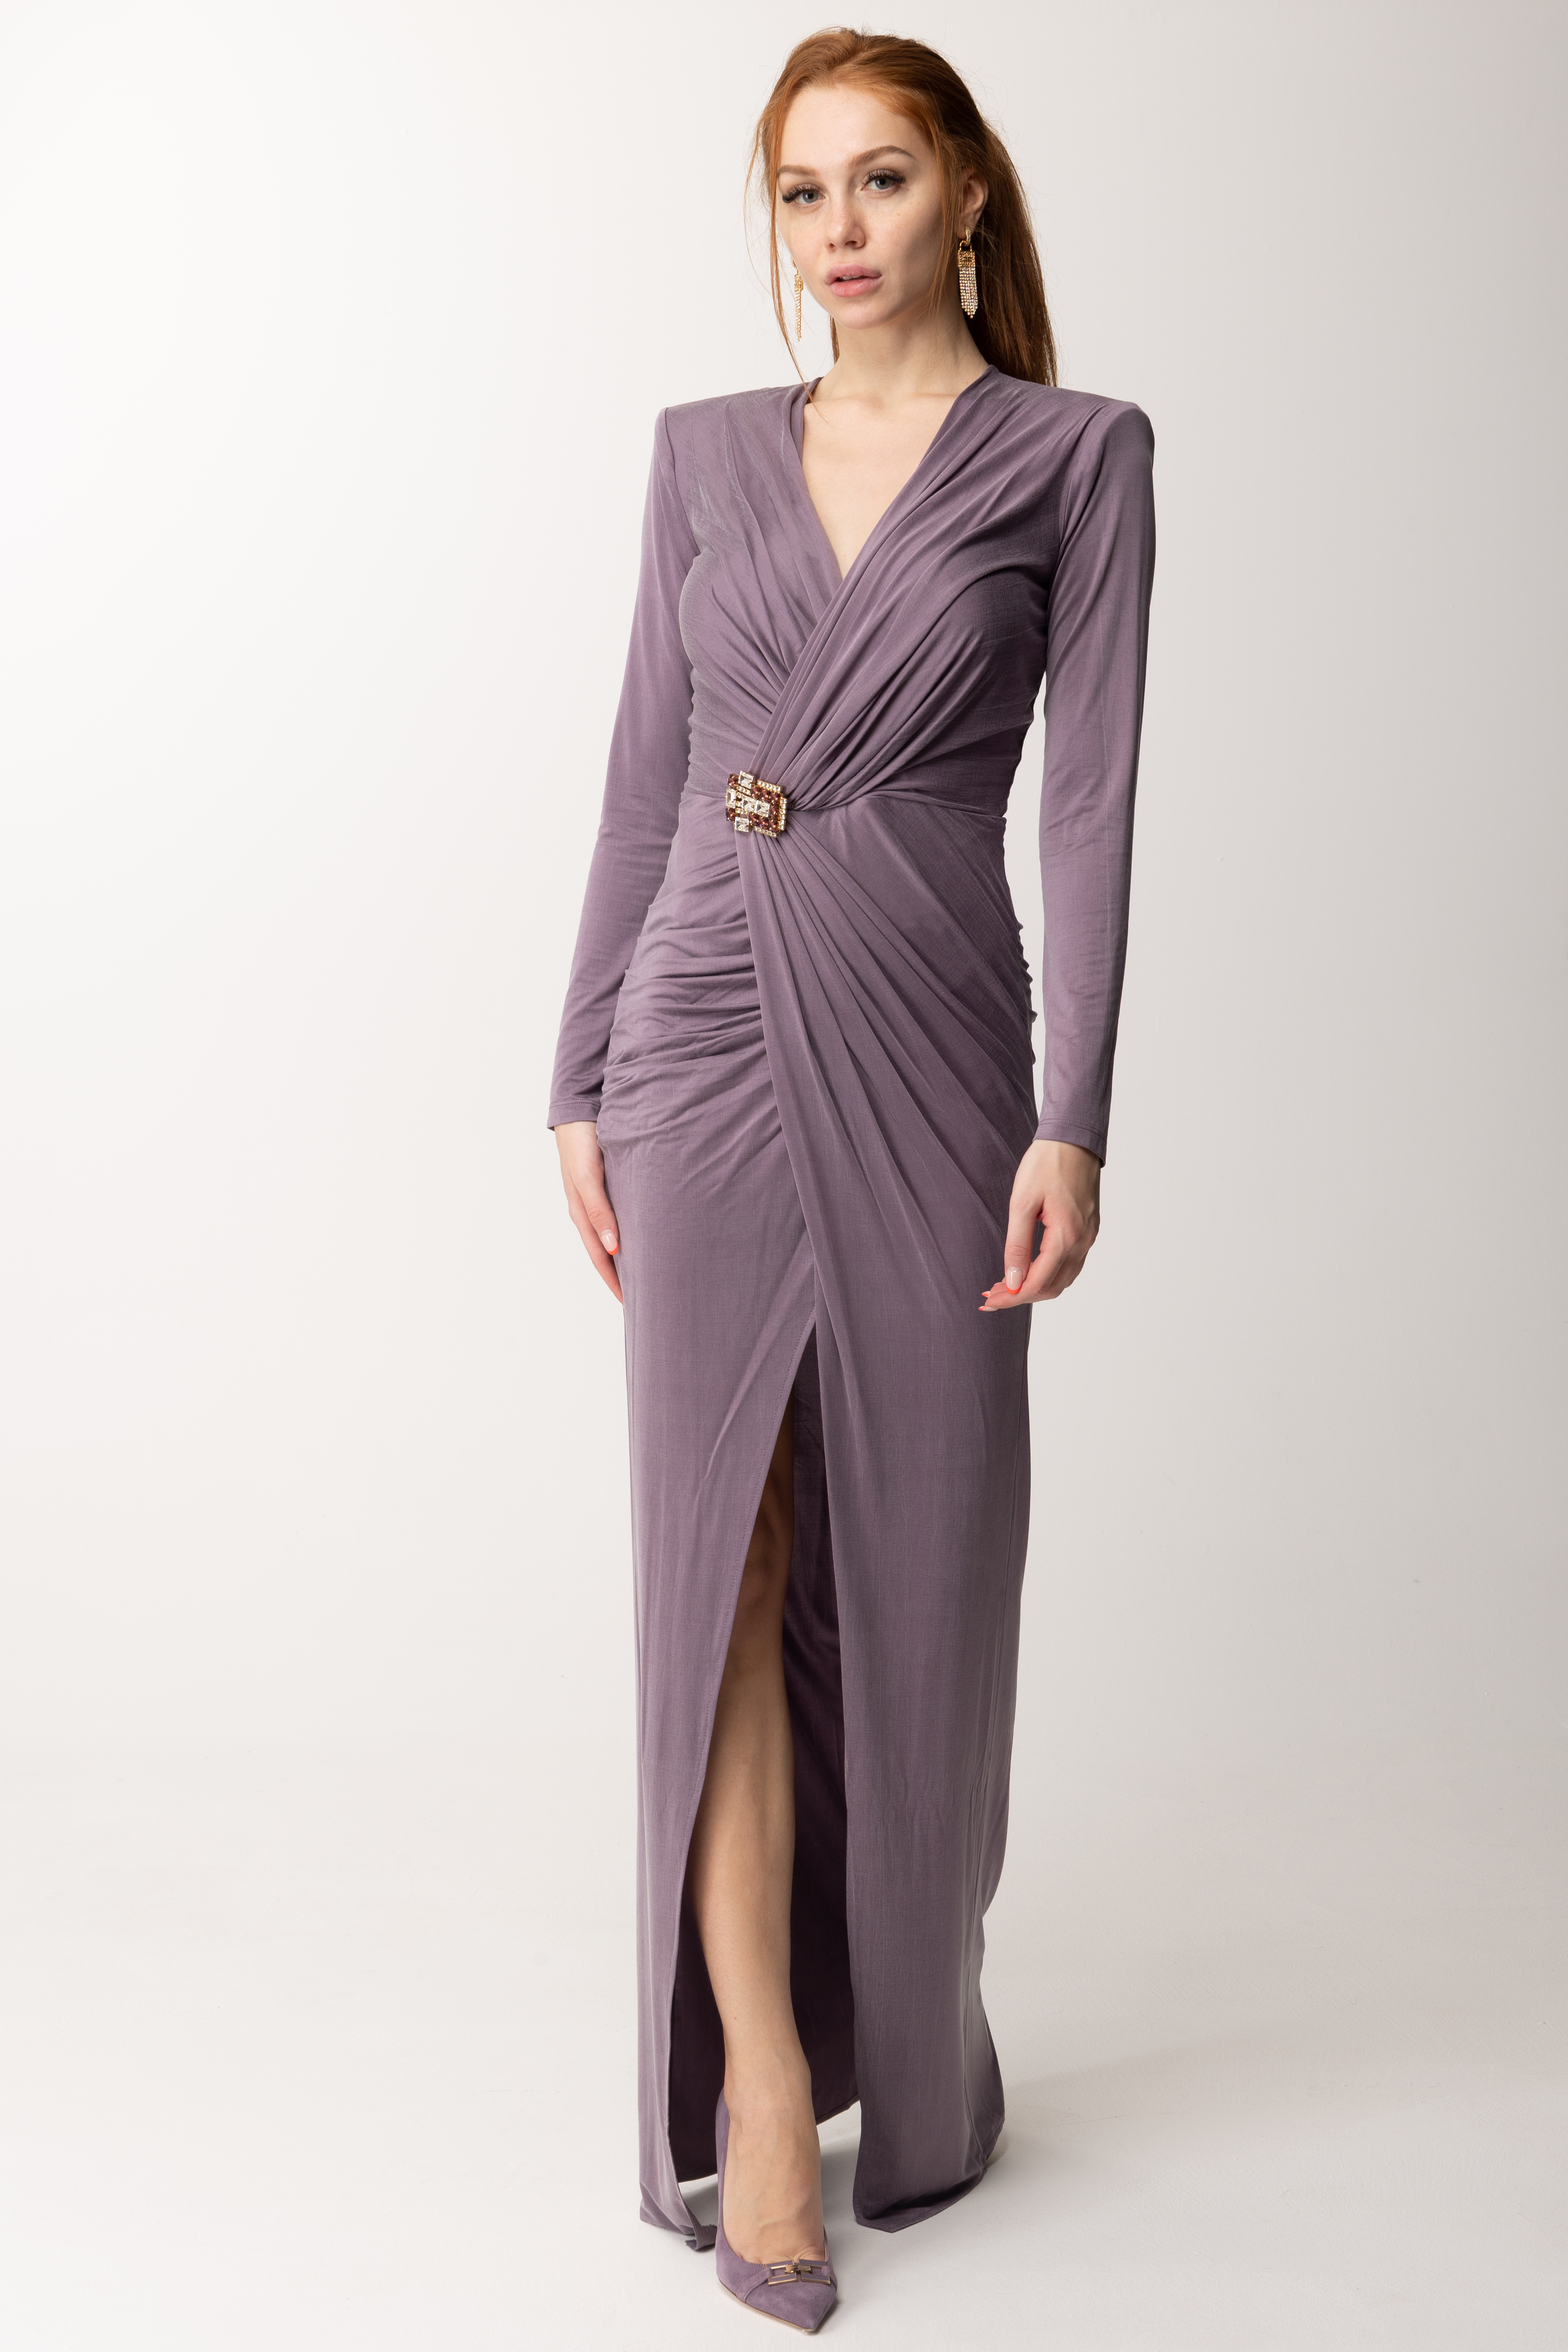 Preview: Elisabetta Franchi Cupro Red Carpet Dress with Jewel Closure CANDY VIOLET